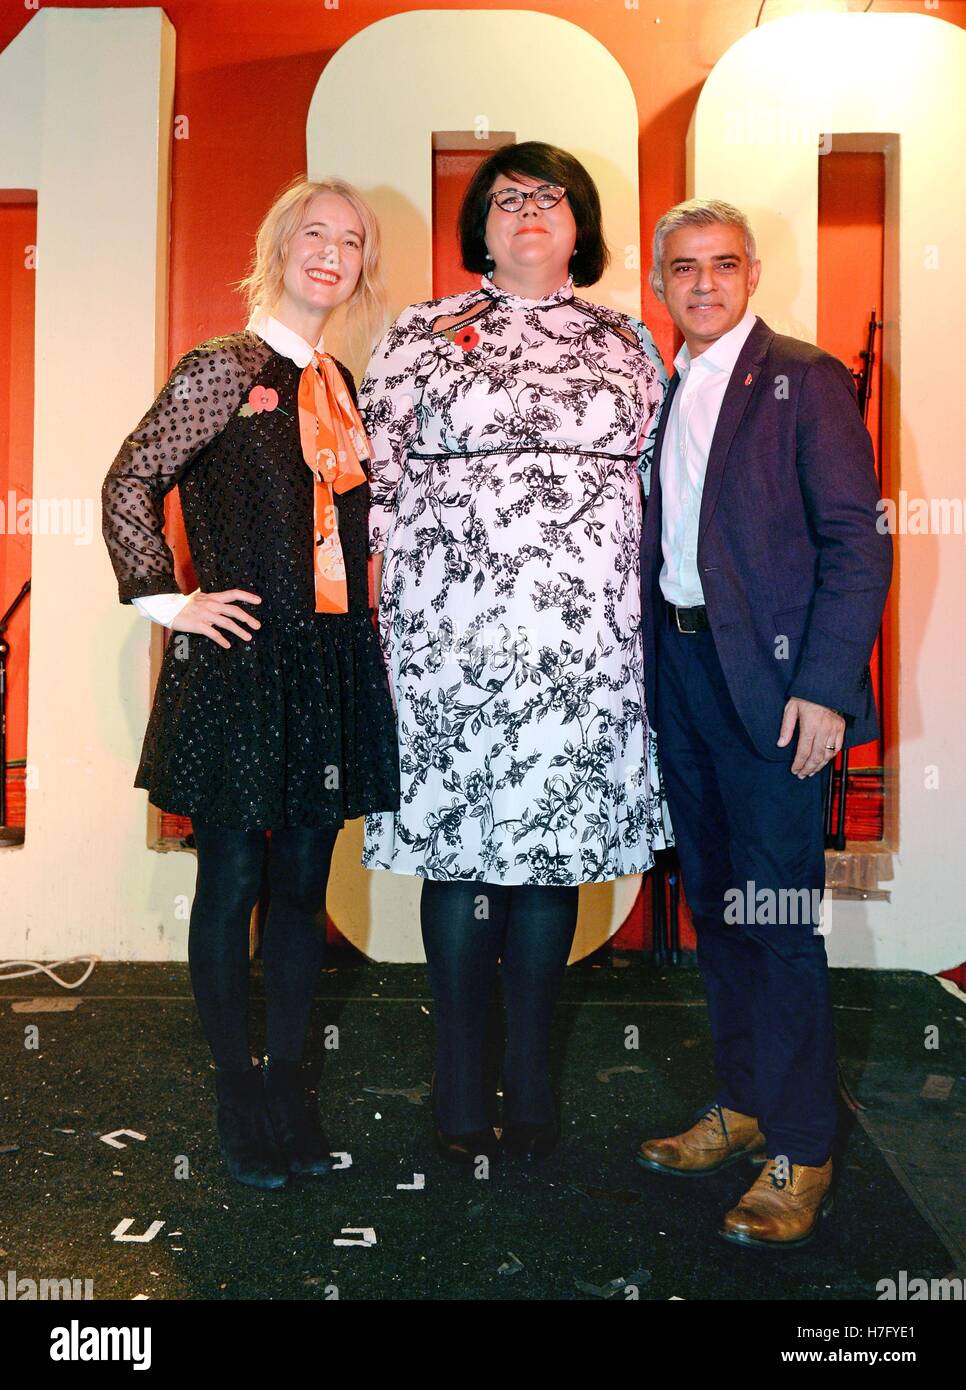 Deputy Mayor for Culture Justine Simons (left) and the Mayor of London Sadiq Khan, with Amy Lame (centre), who has been appointed as London's first Night Czar, at the 100 Club, London. Stock Photo